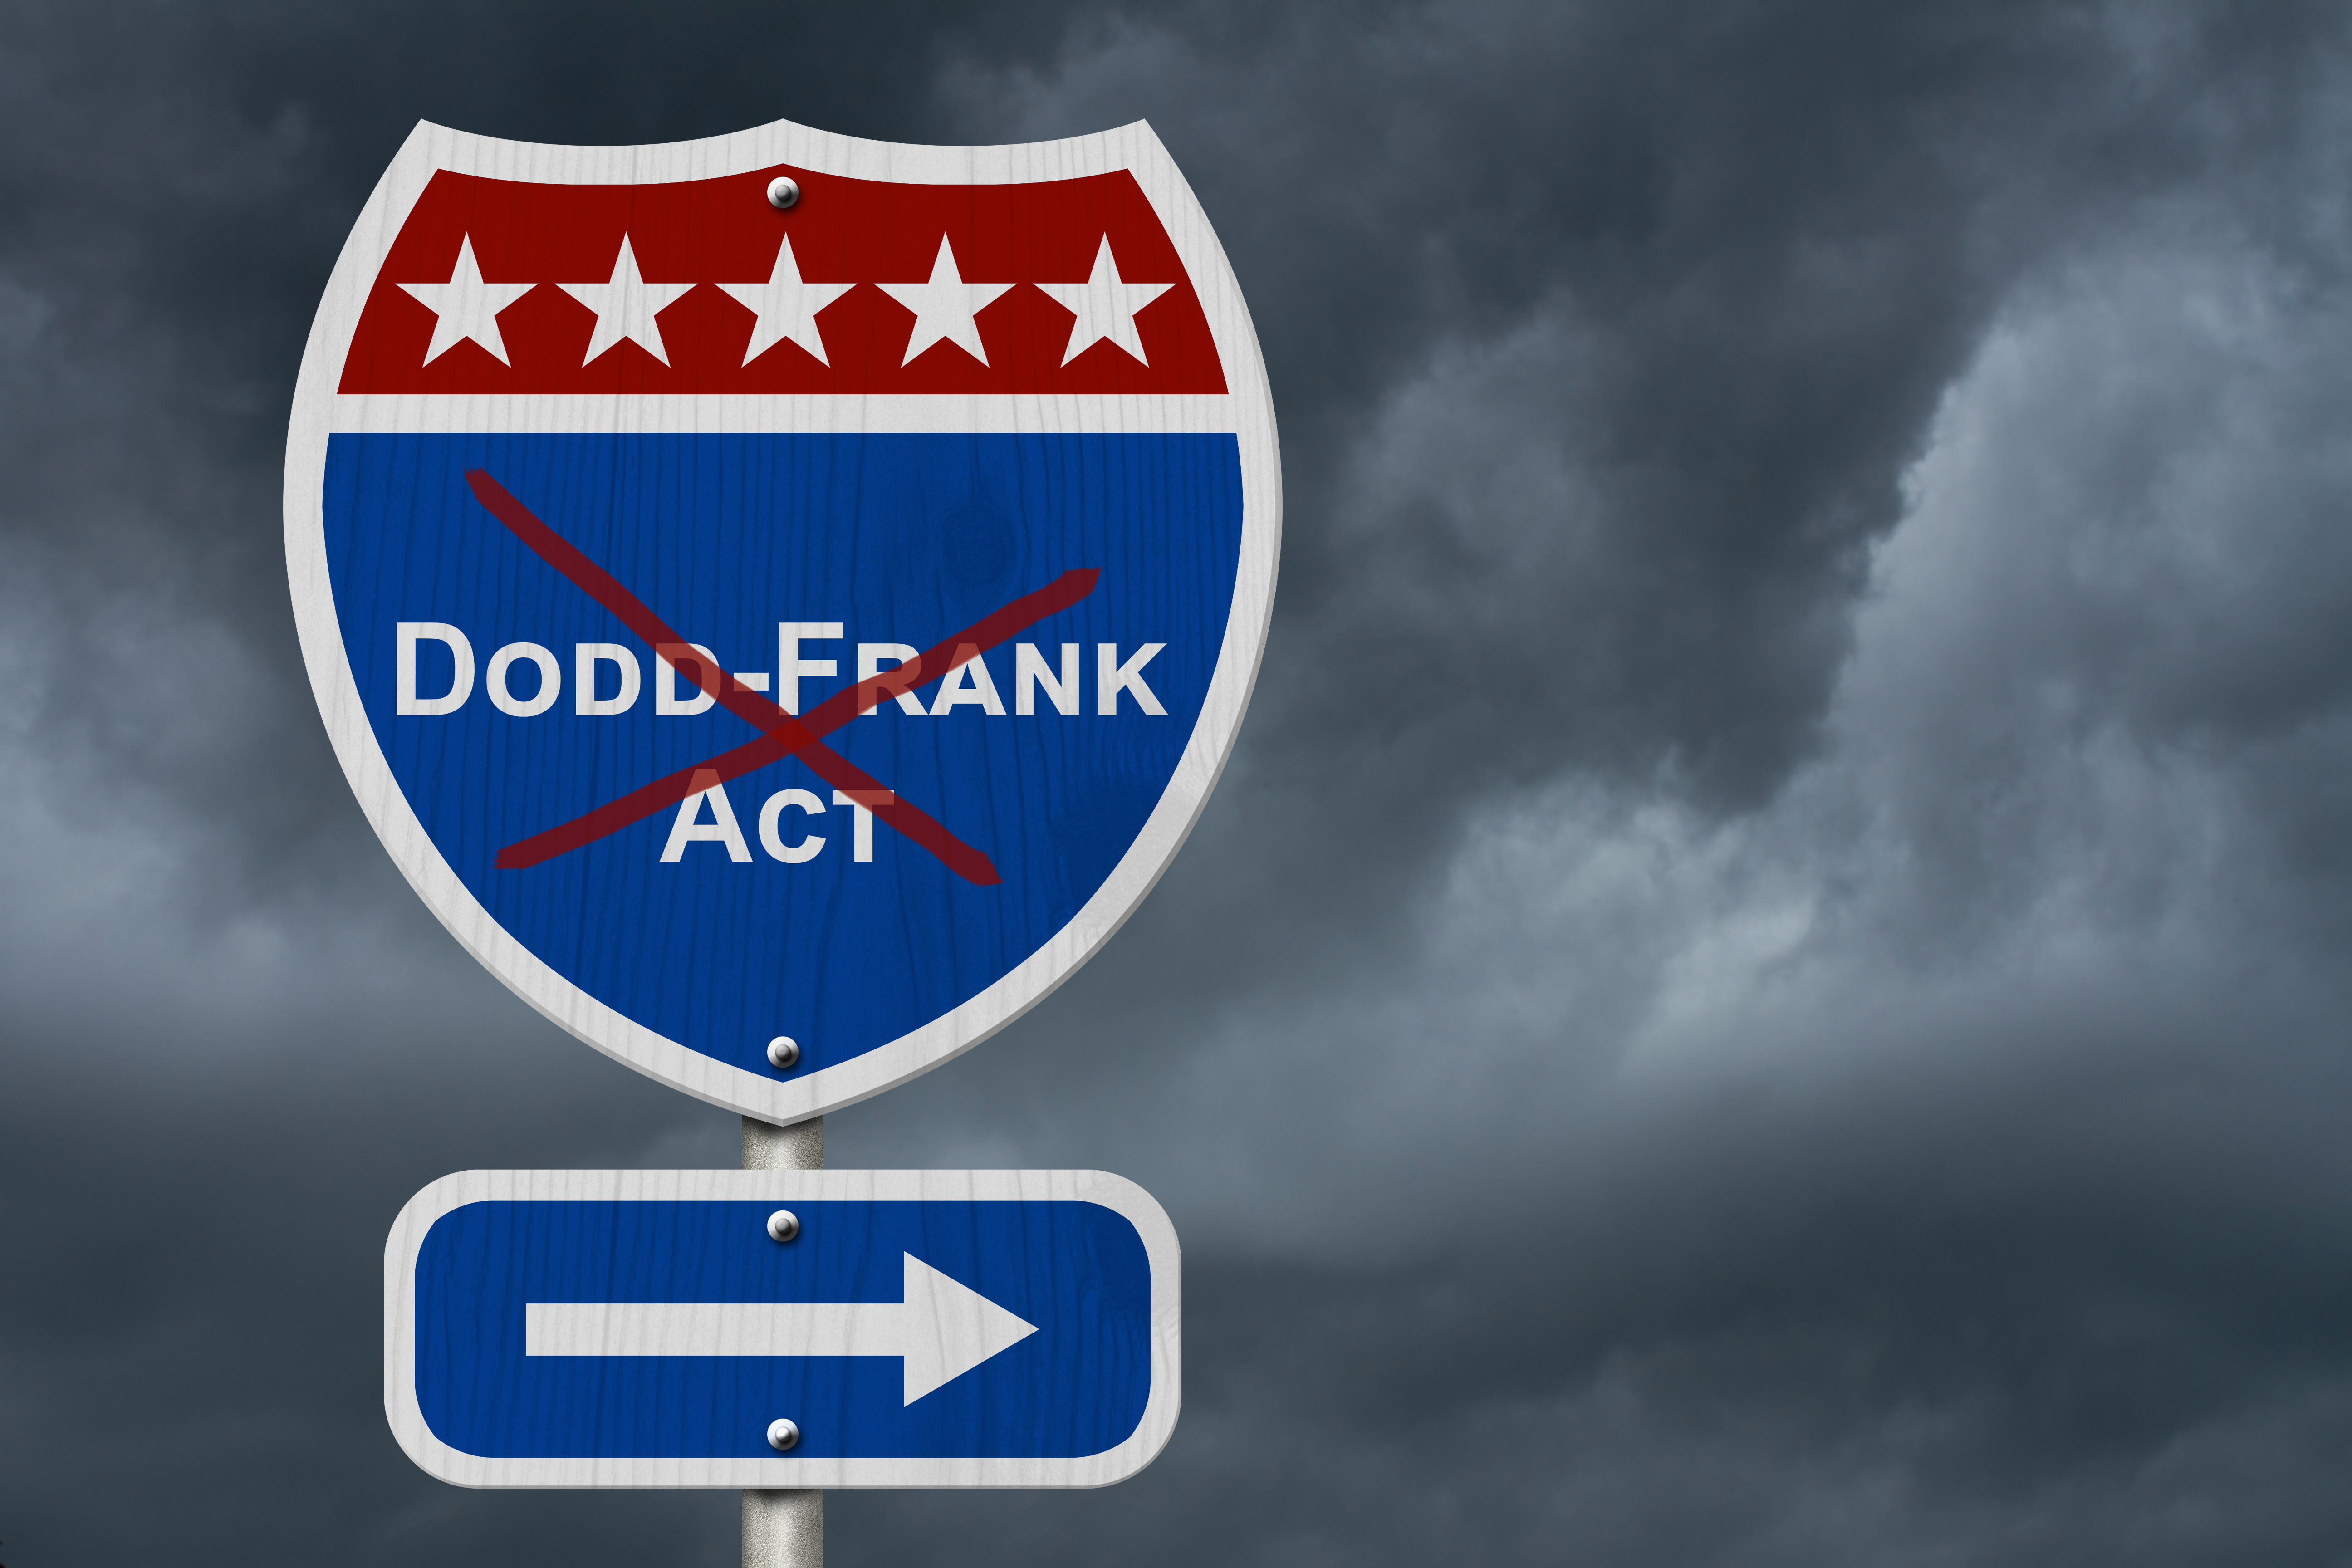 Dodd-Frank and Durbin: Were They ‘Trumped Up?’ - GonzoBanker.com